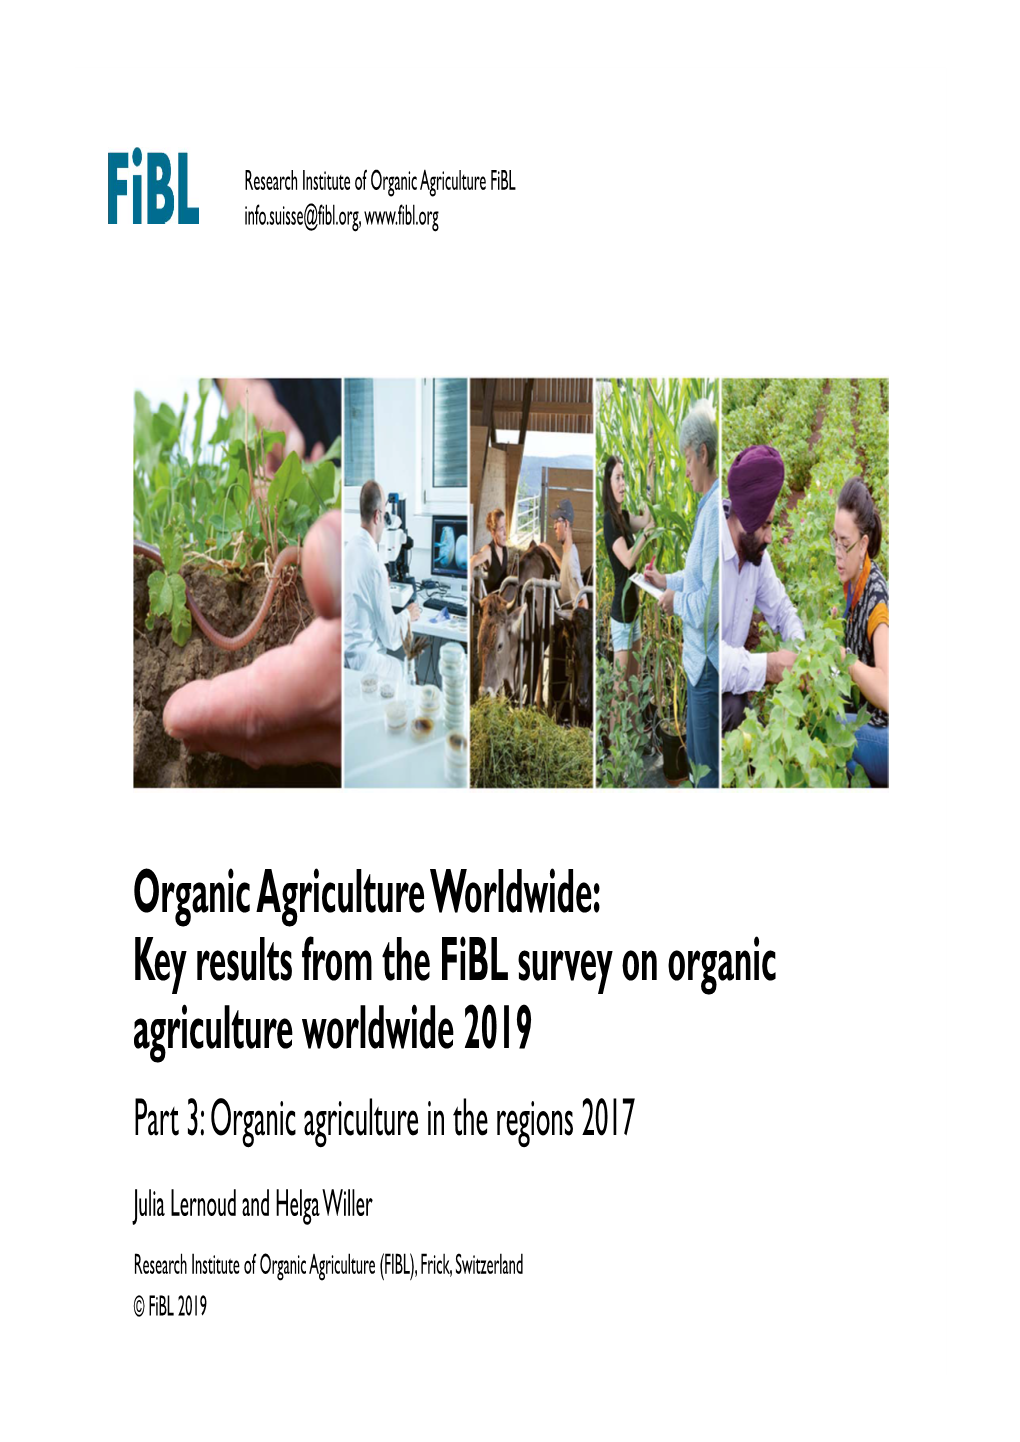 Key Results from the Fibl Survey on Organic Agriculture Worldwide 2019